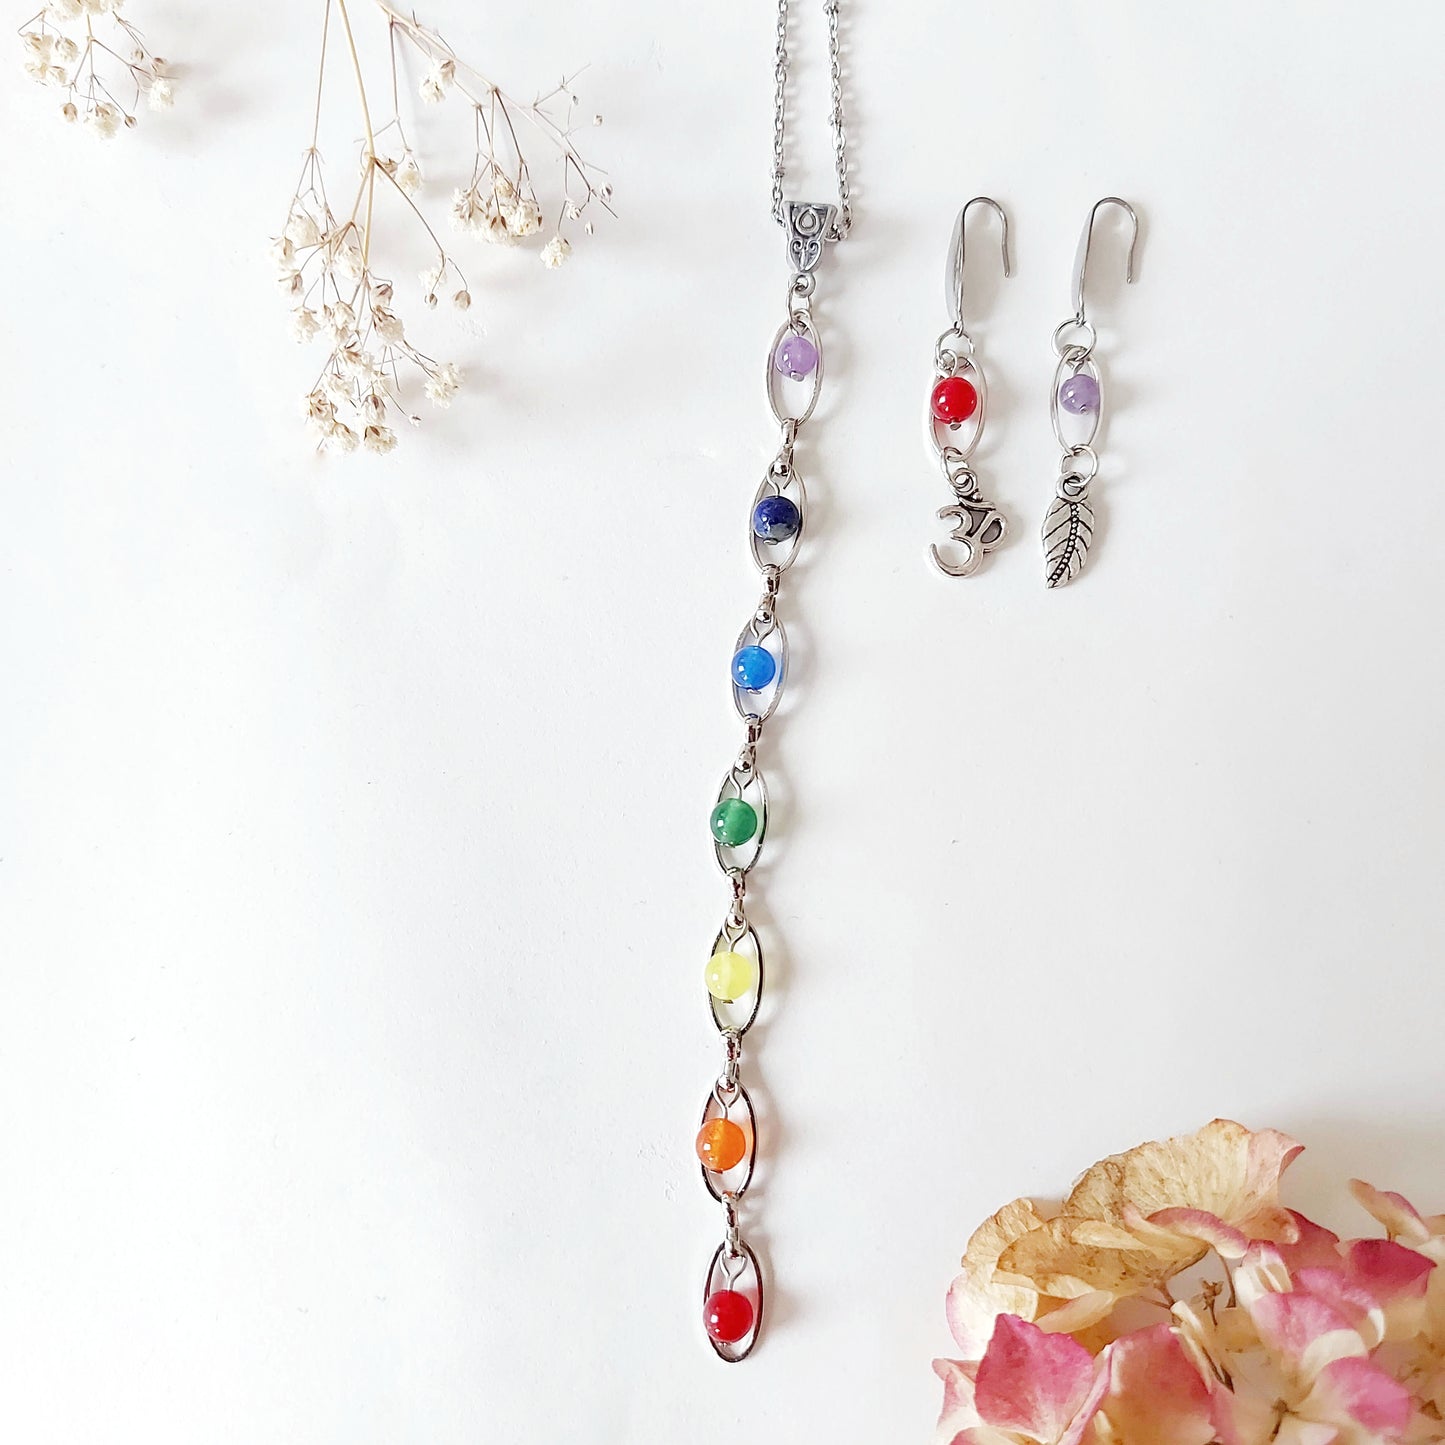 CHAKRA FLOW silver colored set Necklace and Earrings with Jade, Lapis Lazuli, Chevron Amethyst